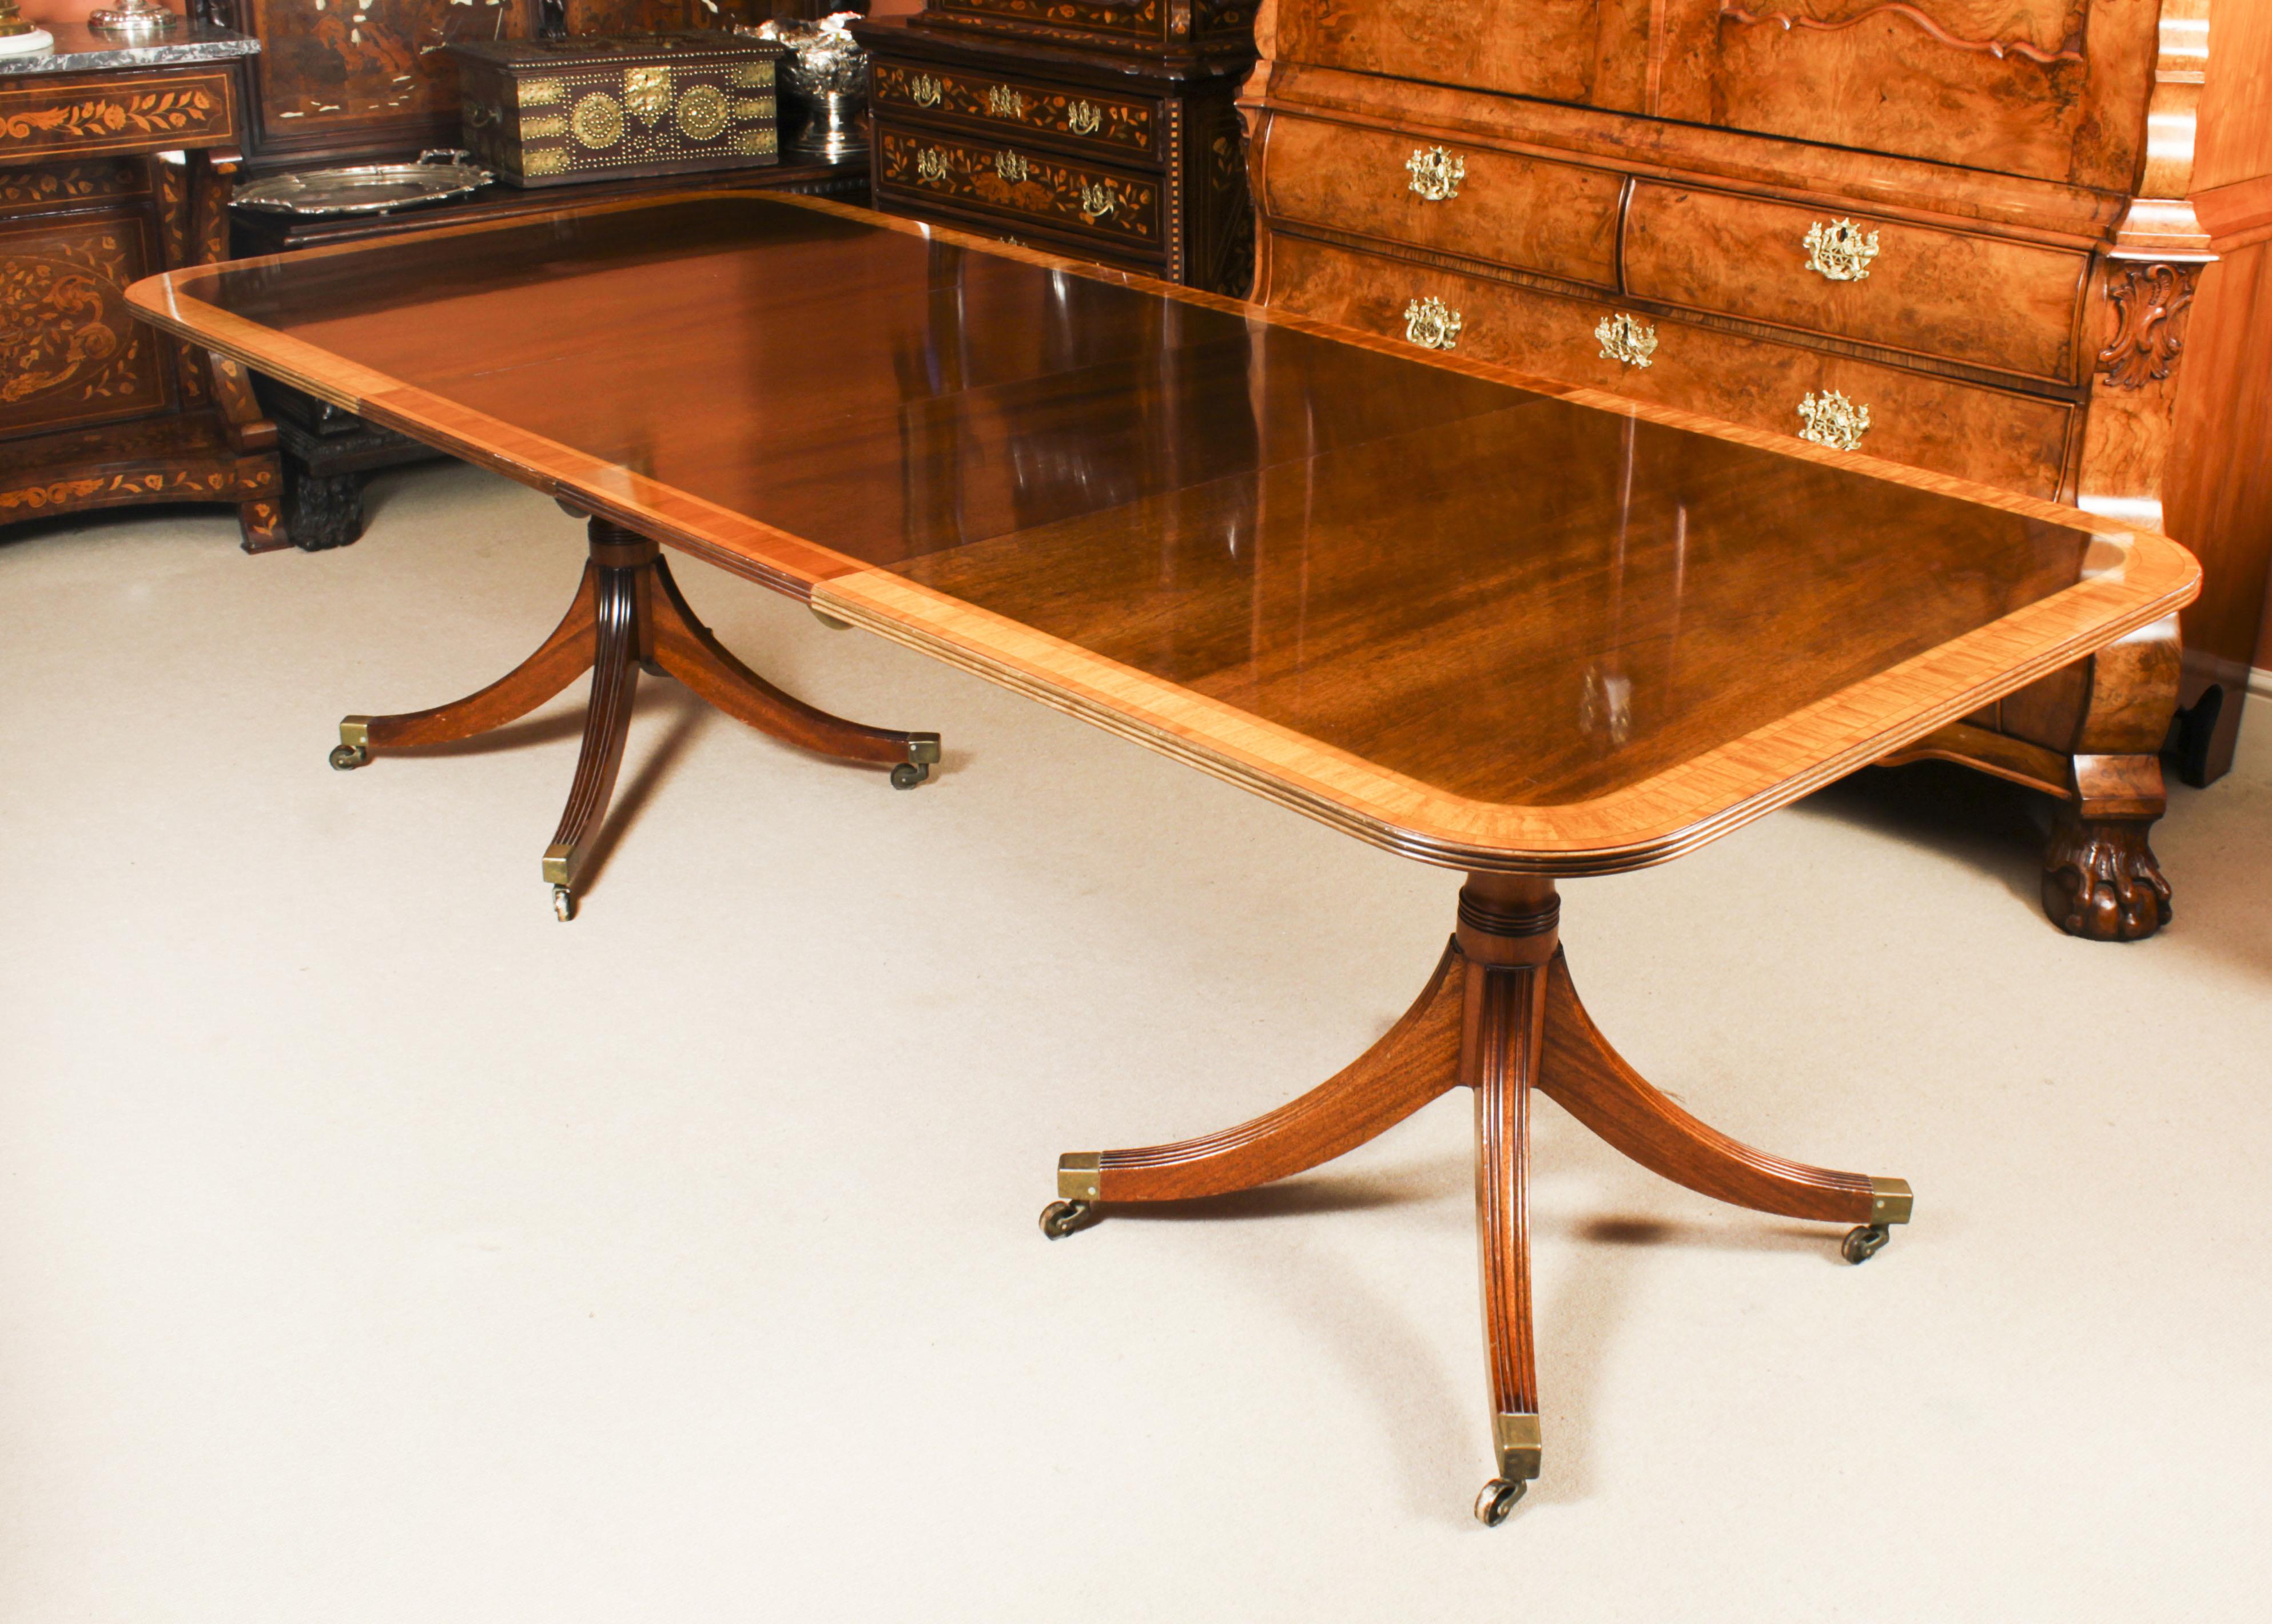 Regency Revival Vintage Twin Pillar Dining Table by William Tillman & 10 dining chairs 20th C